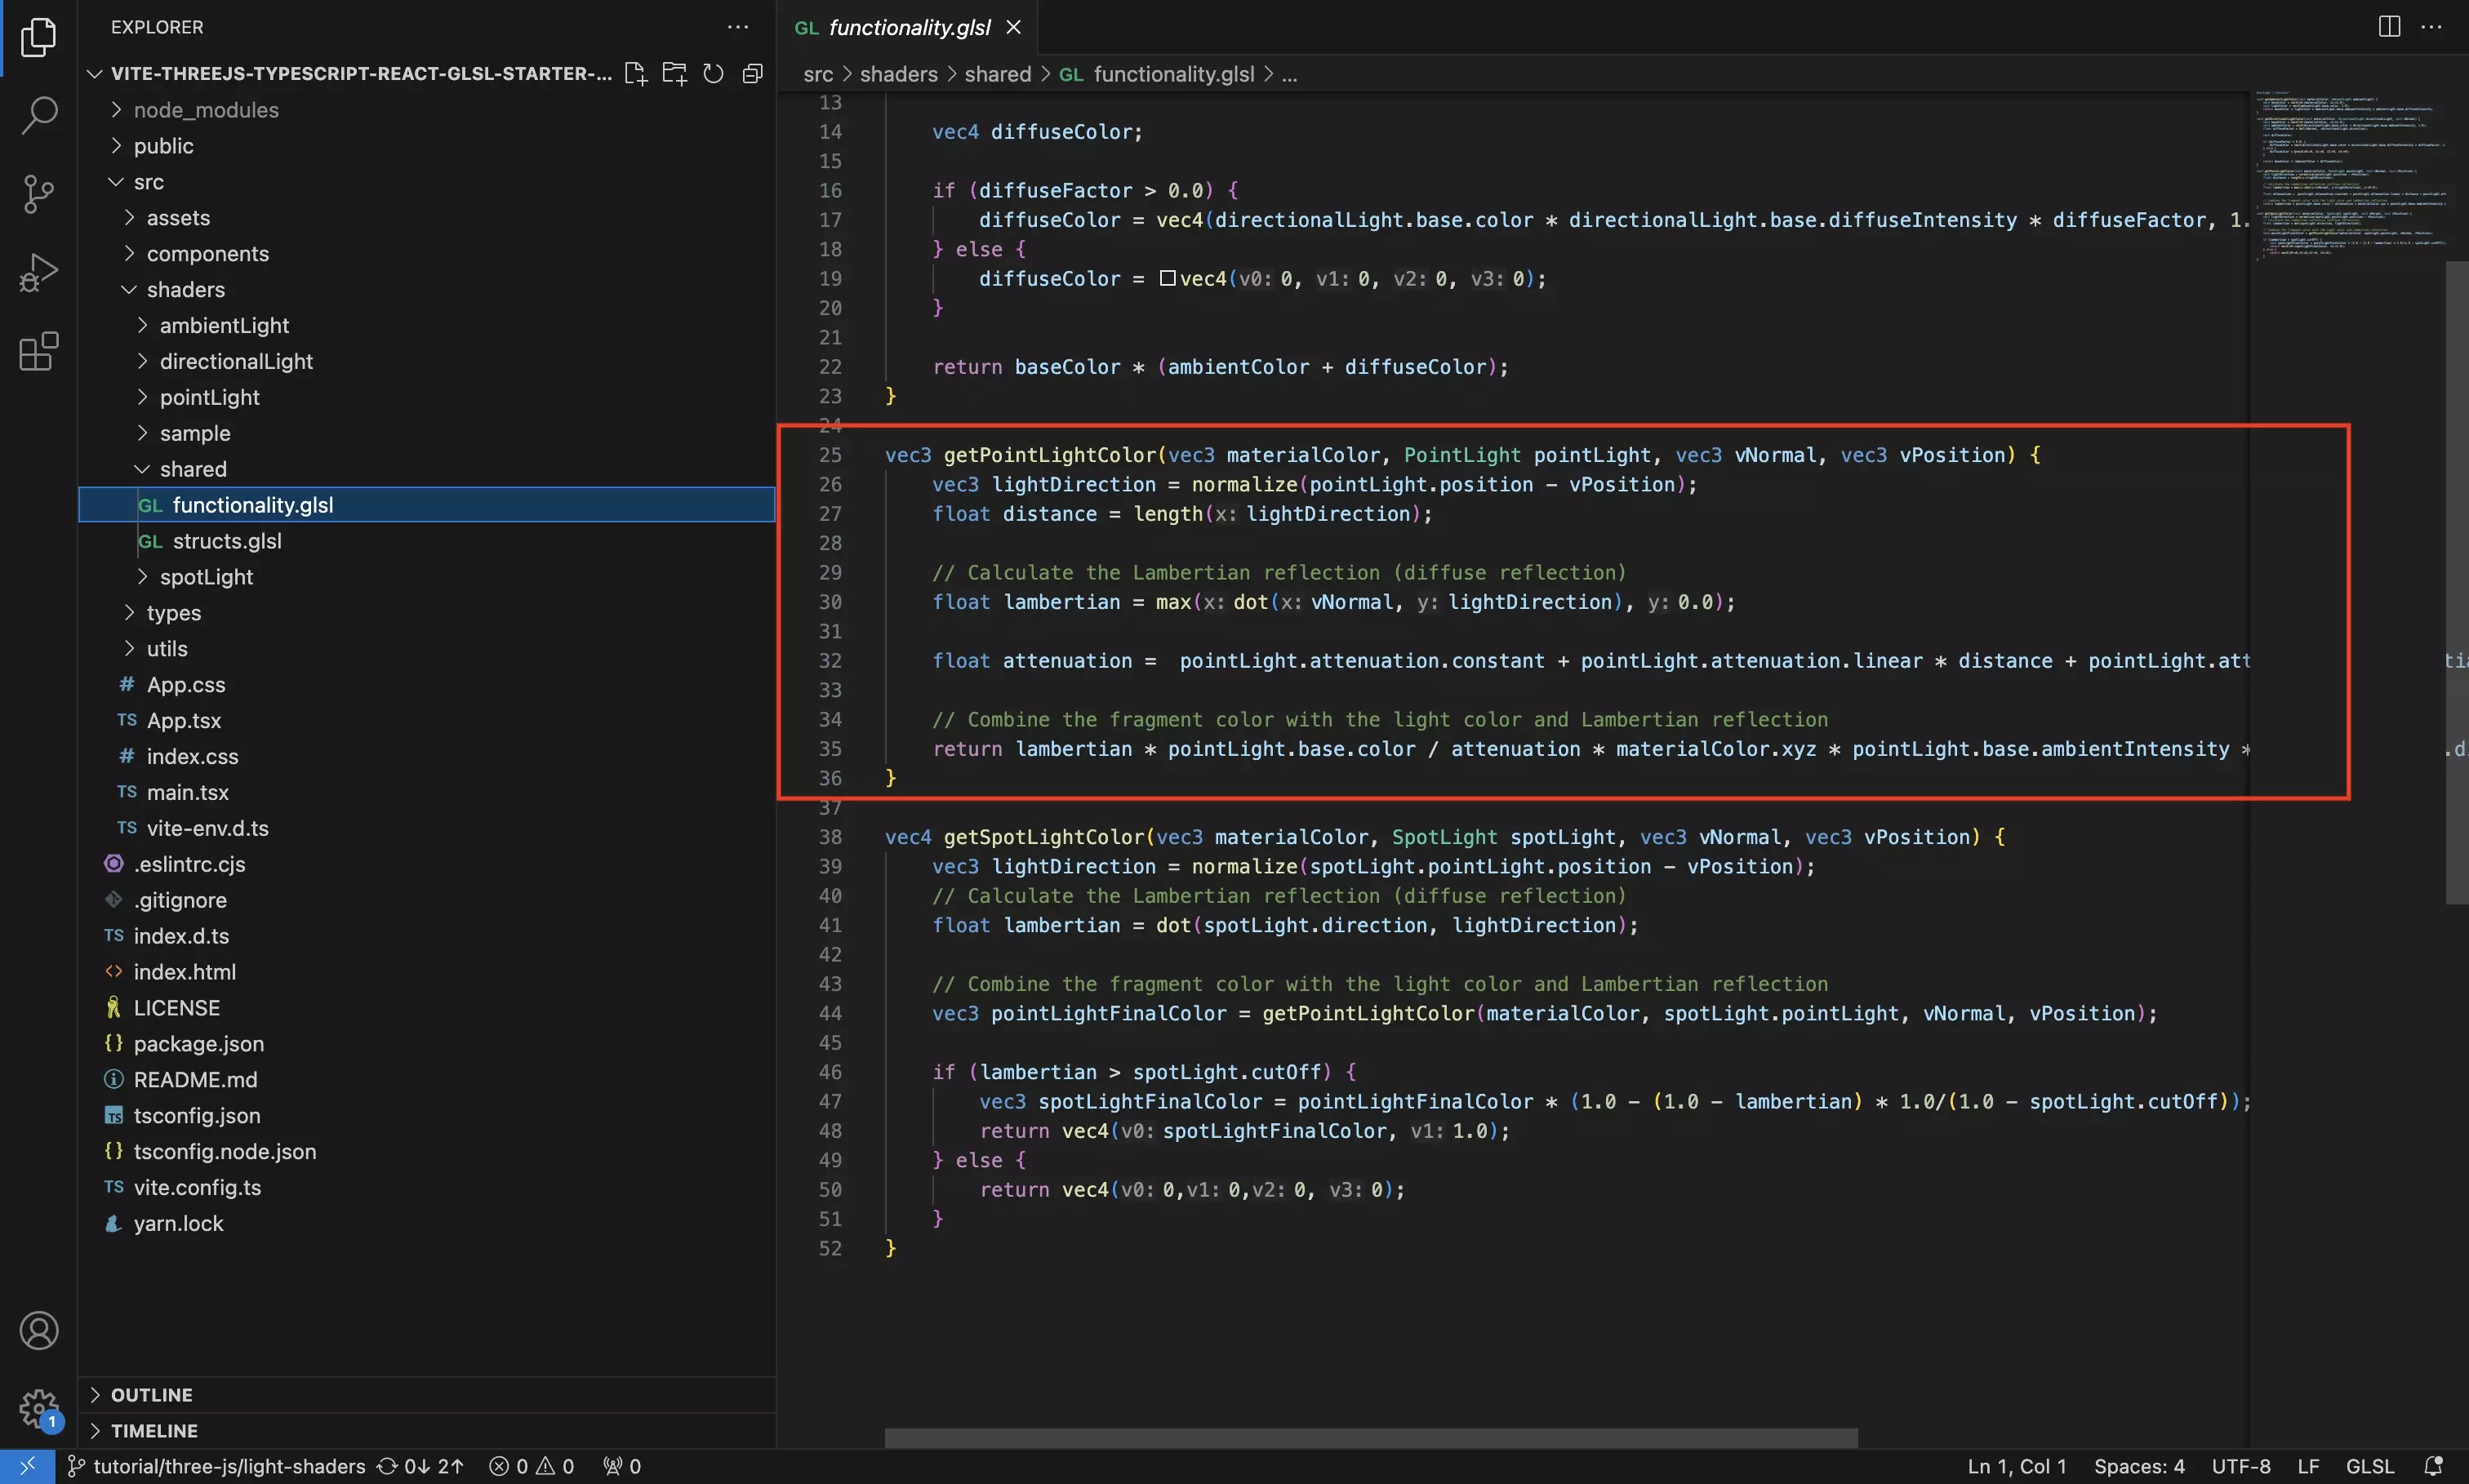 A screenshot of VSCode highlighting the functionality that is required for the Point Light shader.